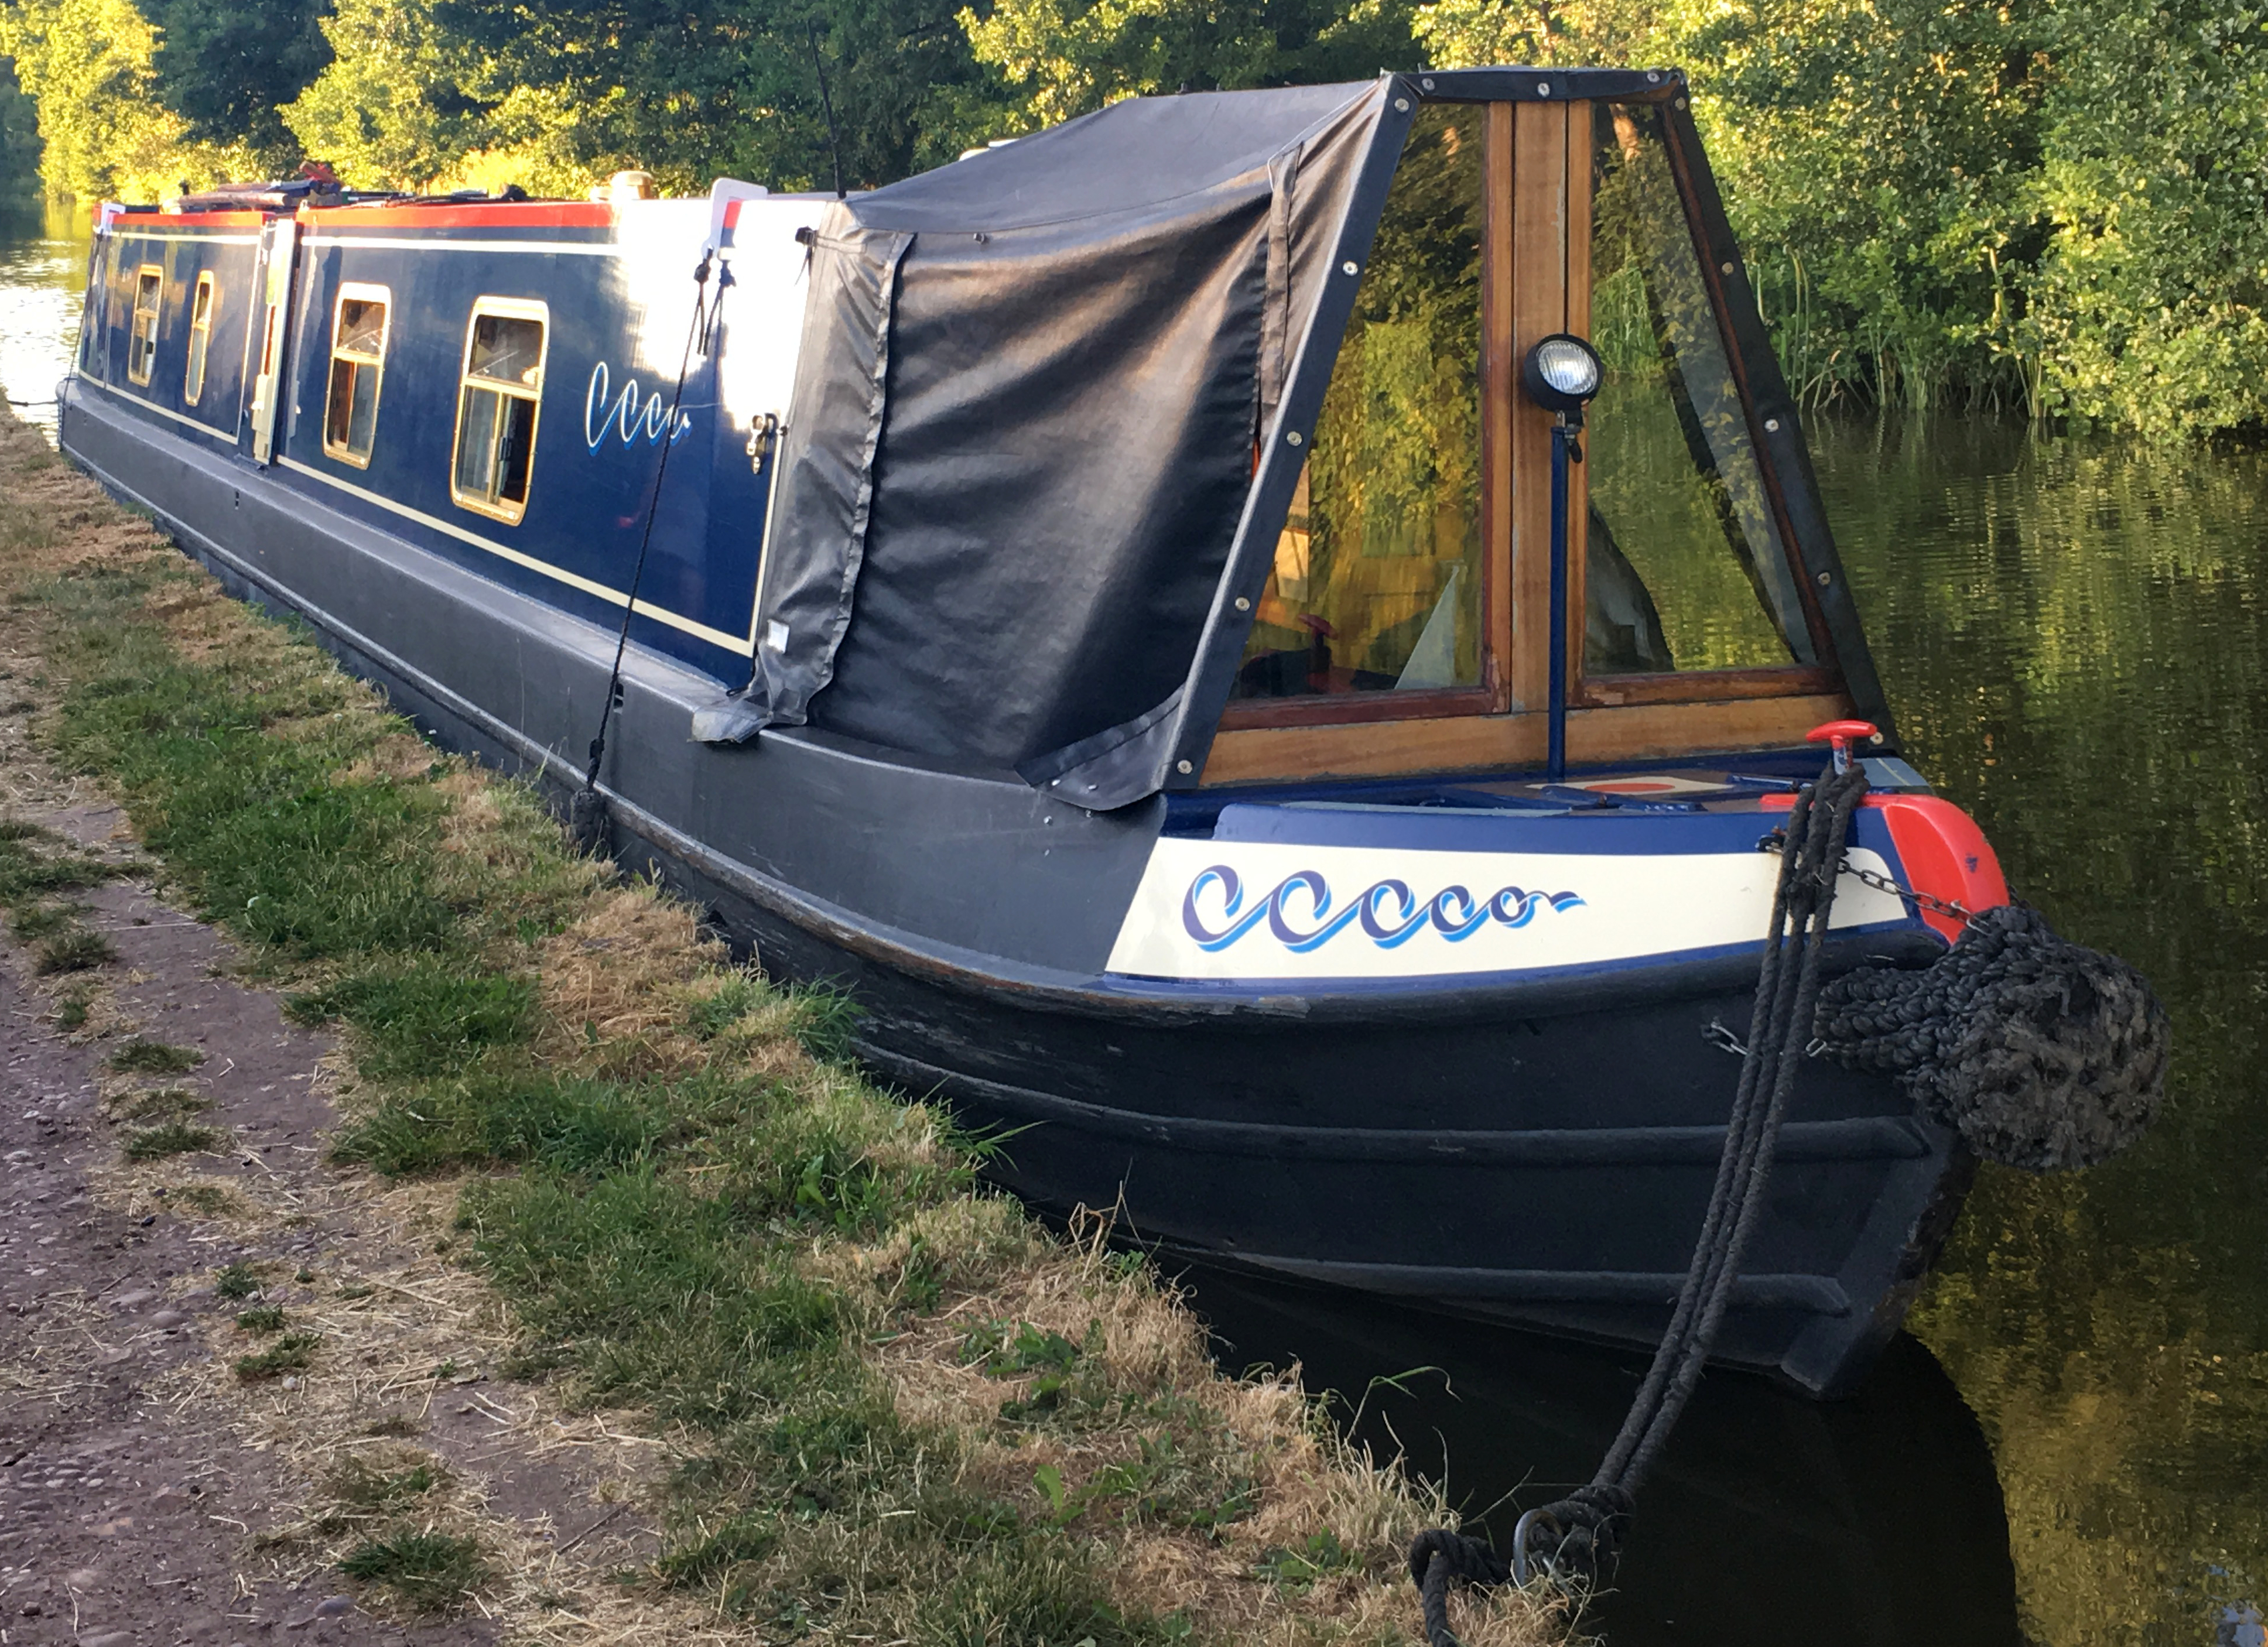 Photograph showing the dark blue canal boat, Vulcan, as viewed fromt the towpath in front of the boat